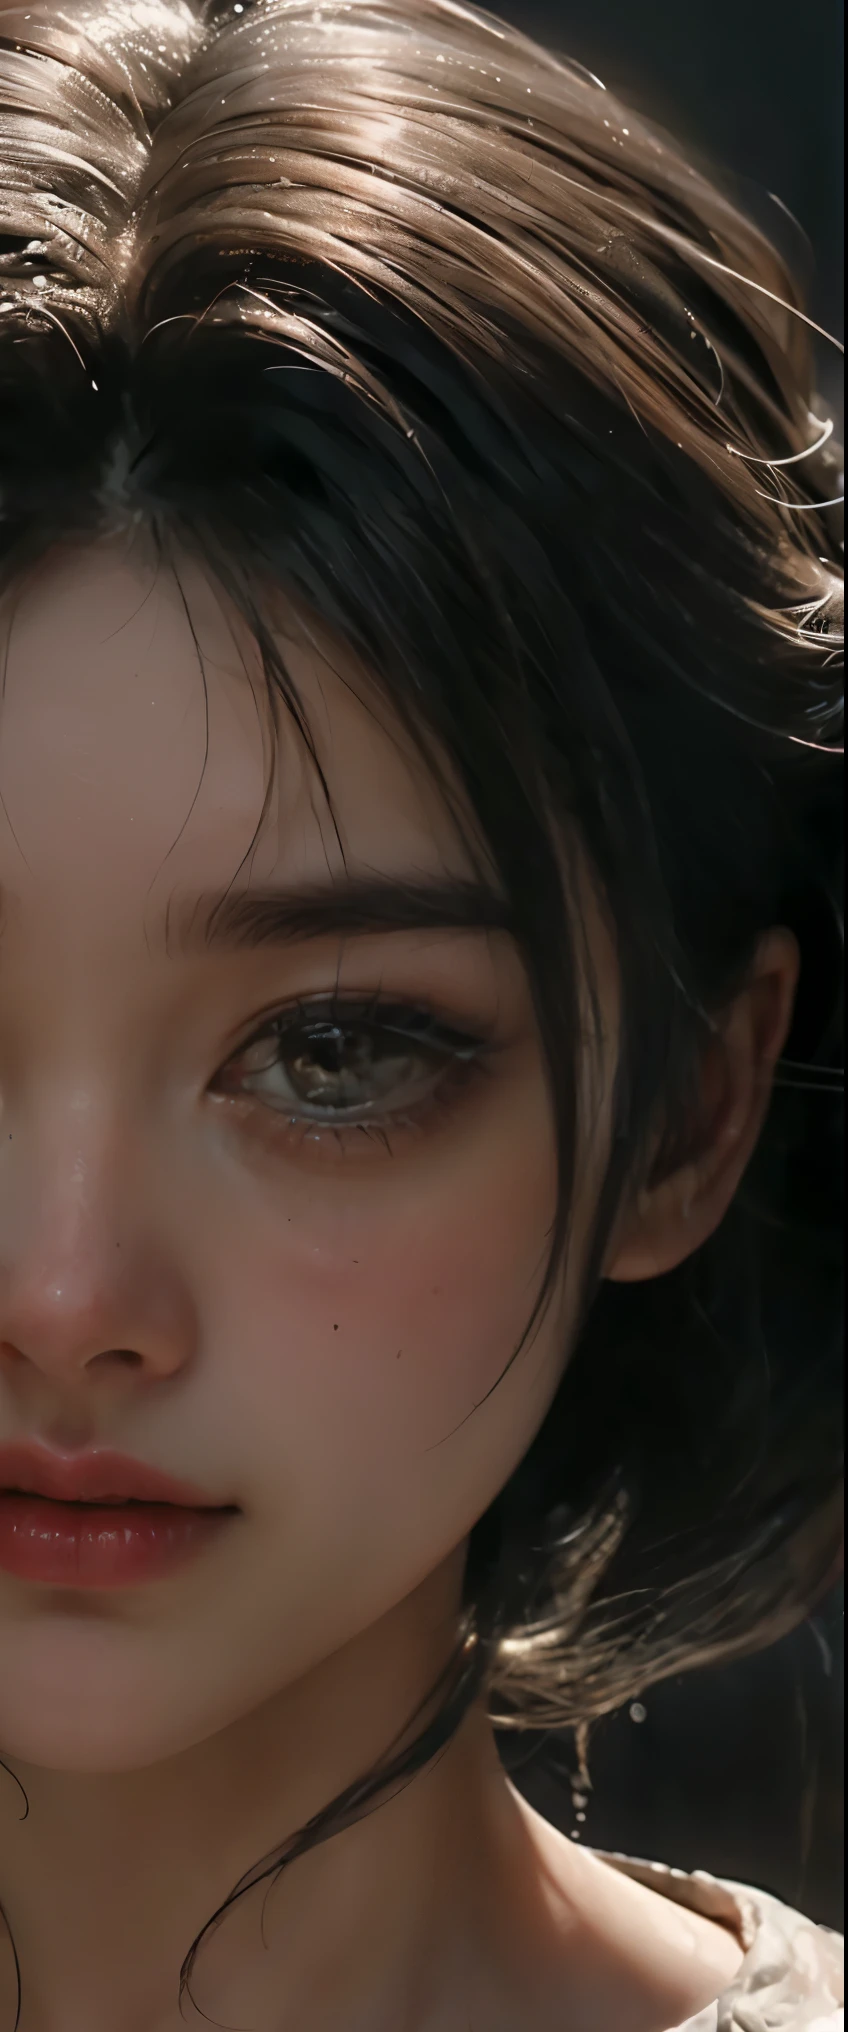 ((masterpiece, highest quality, Highest image quality, High resolution, photorealistic, Raw photo, 8K)), Young woman wearing ring crying, crying woman, tears streaming down face, tears dripping from eyes, tears crying, crying person, single tear, tears, close up of face melting in anguish, tears on face, crying and weeping, tears, weeping drops, tears dripping from eyes, 